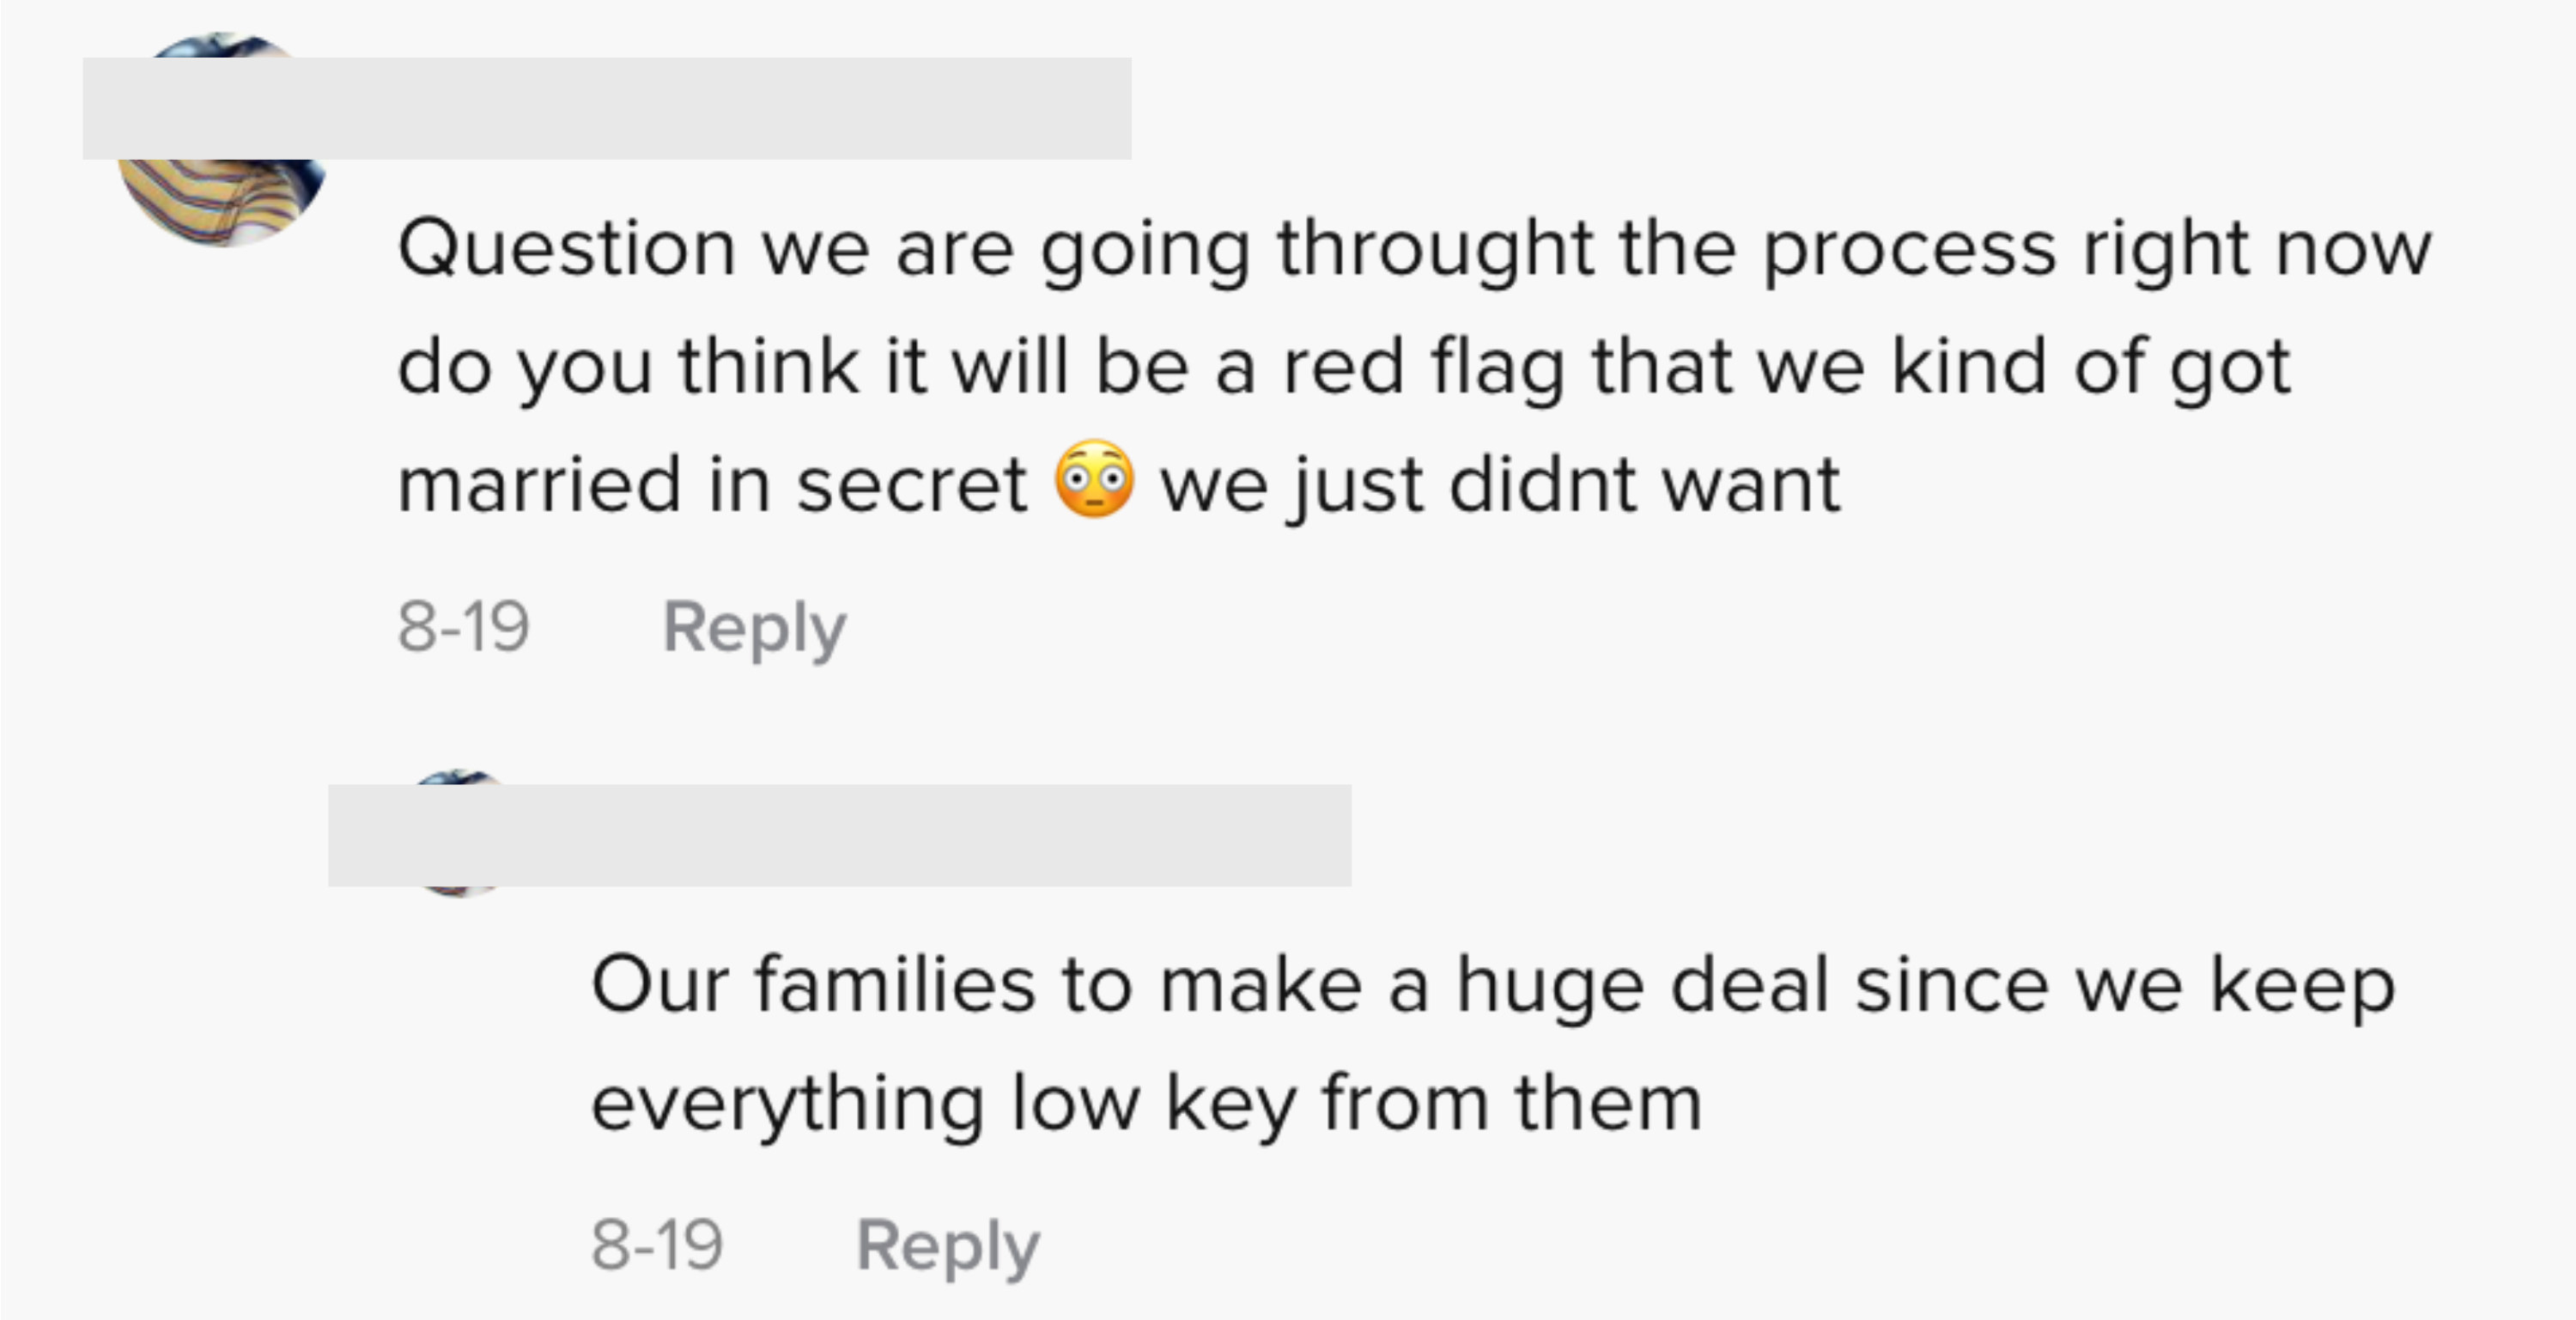 One person asked &quot;we are going through the process right now, do you think it will be a red flag that we kind of got married in secret. we just didn&#x27;t want our families to make a huge deal since we kept everything low key from them